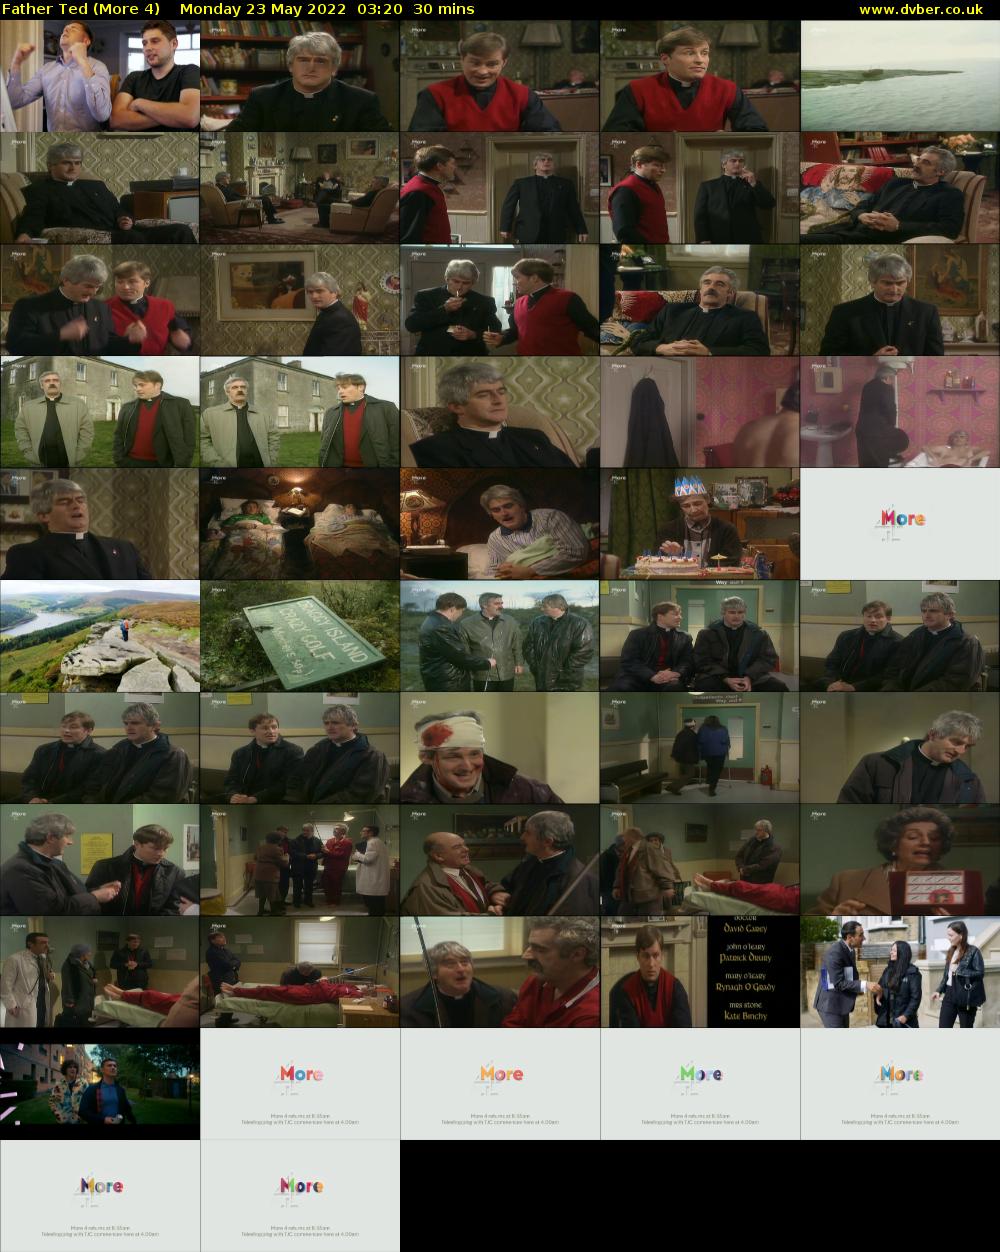 Father Ted (More 4) Monday 23 May 2022 03:20 - 03:50